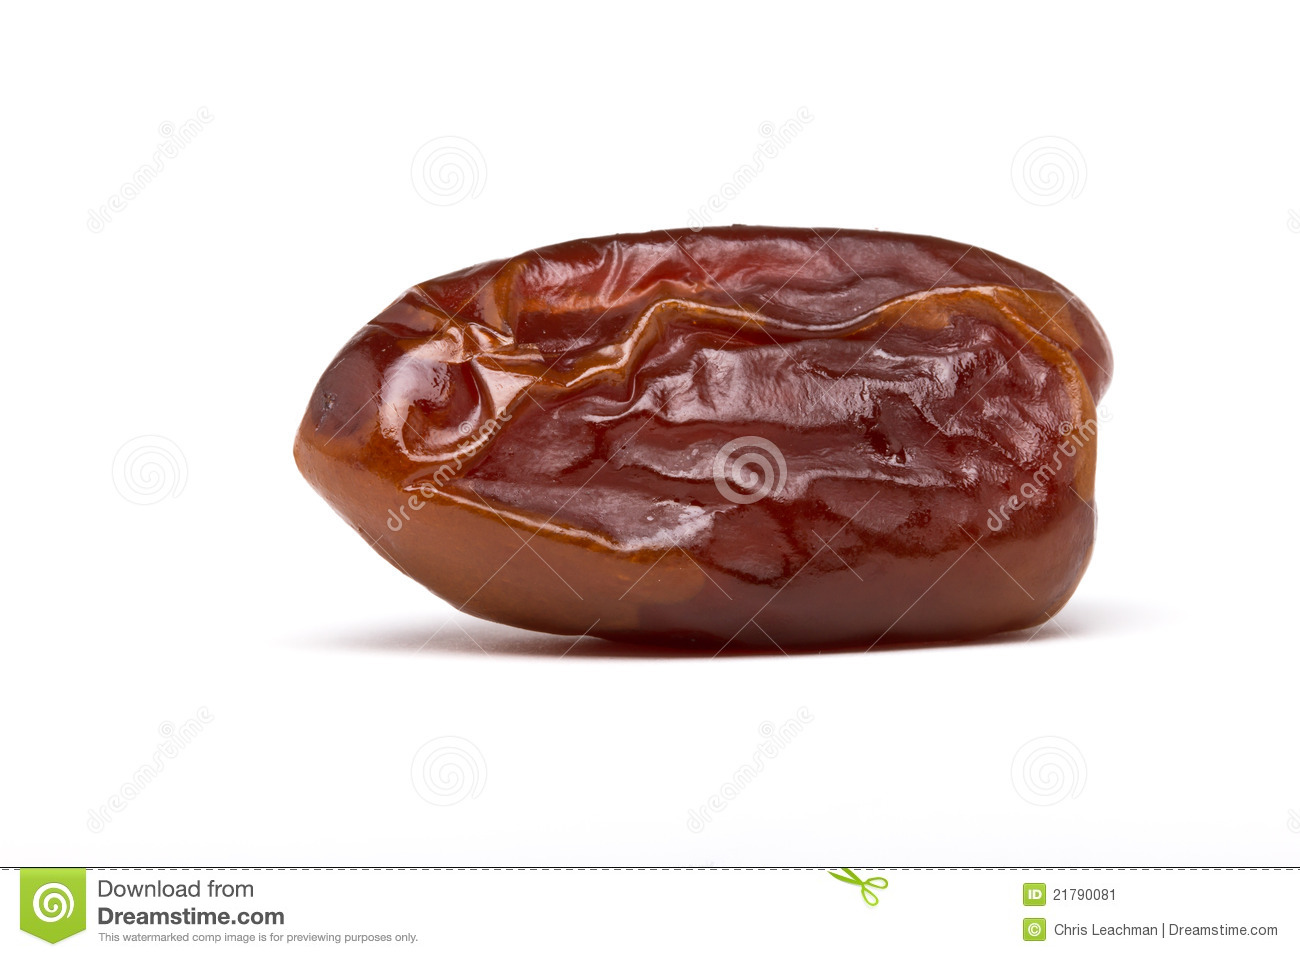 Single Dried Date Fruit From Low Perspective On White Background